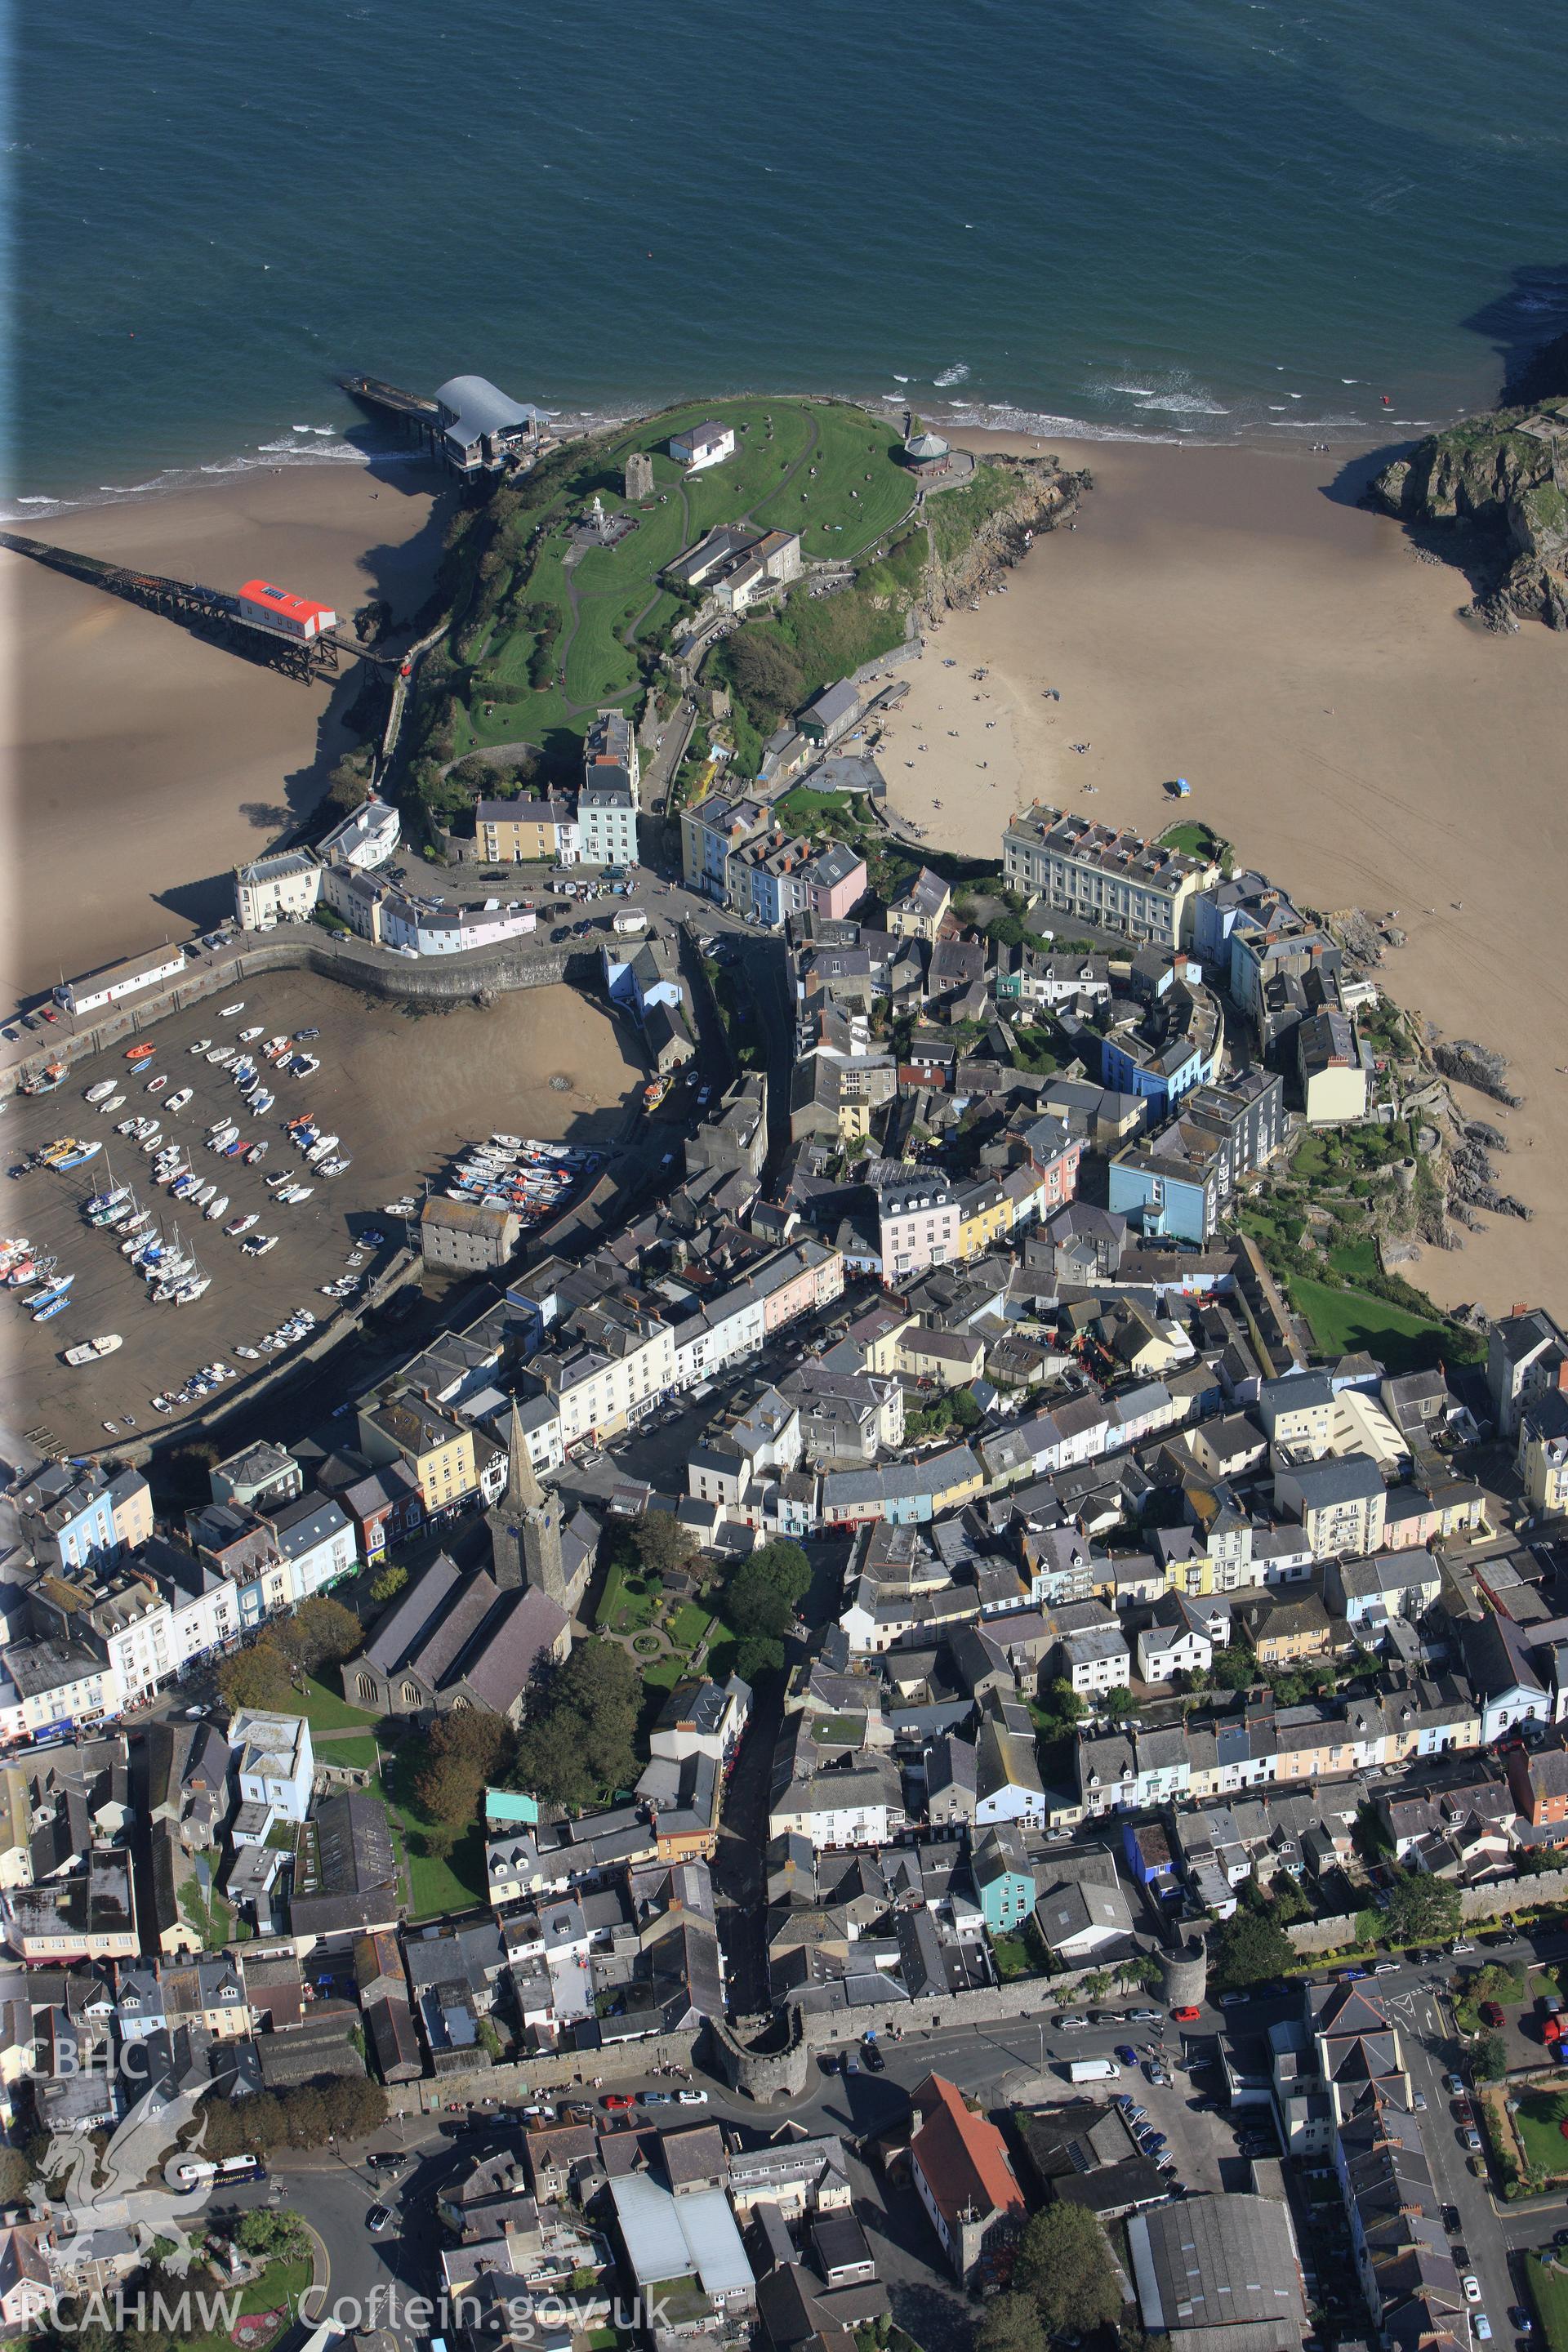 RCAHMW colour oblique photograph of Tenby, looking towards the town wall, St Mary's Church and the harbour. Taken by Toby Driver and Oliver Davies on 28/09/2011.